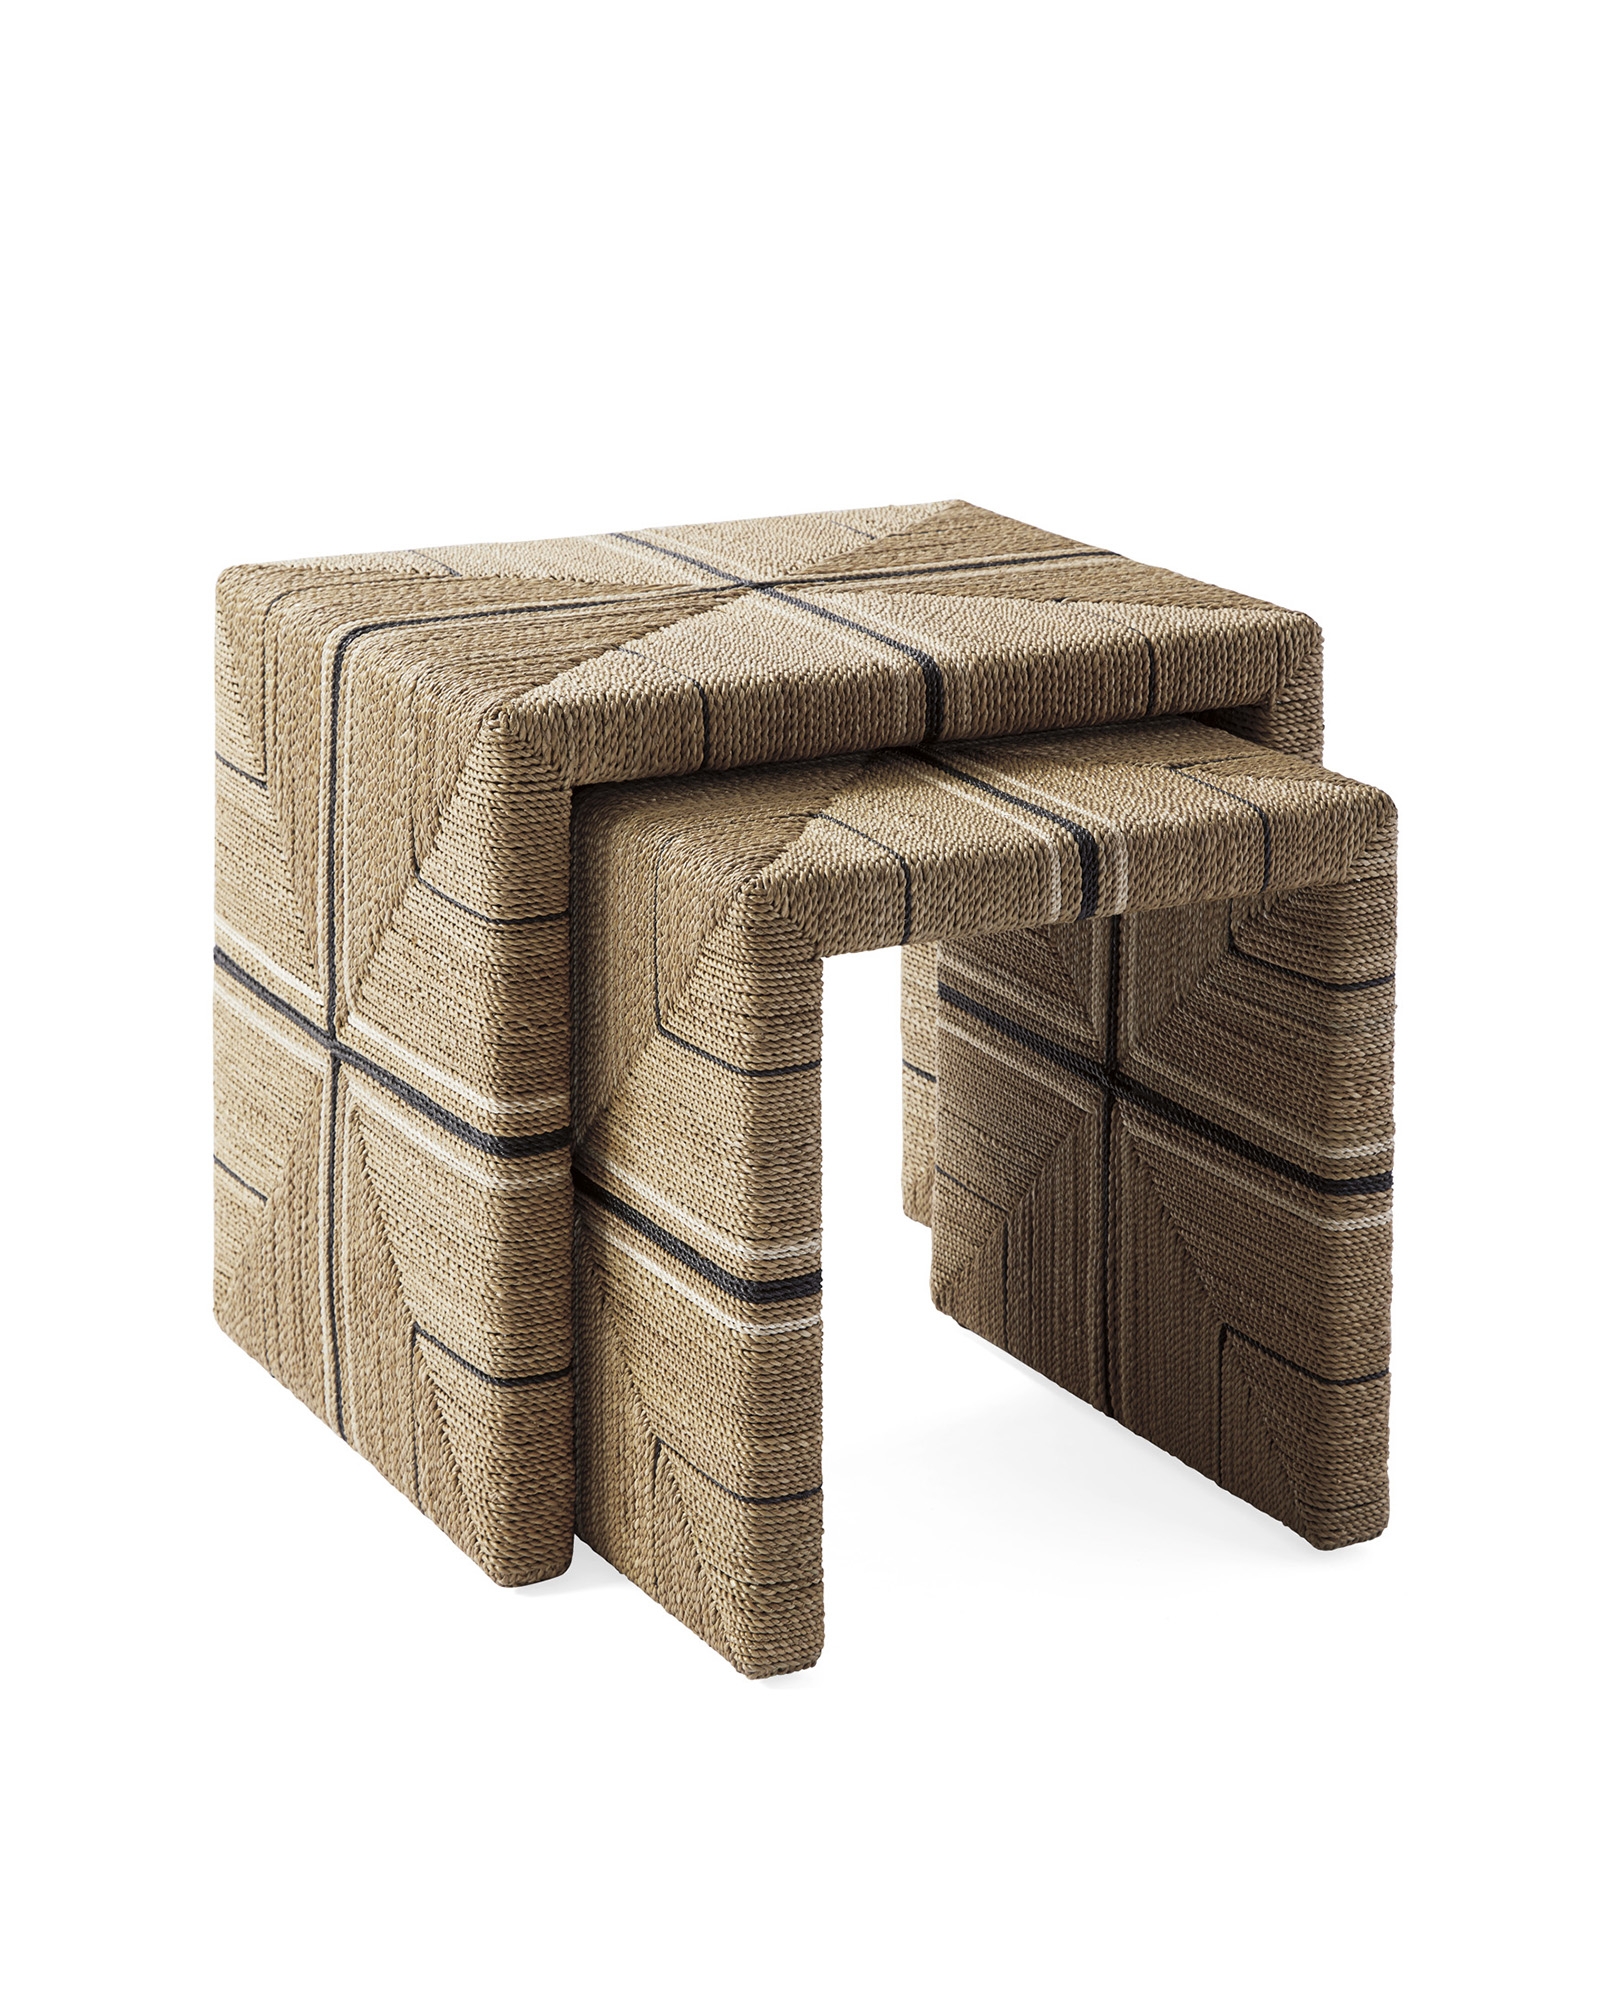 Carson Nesting Tables - Image 1